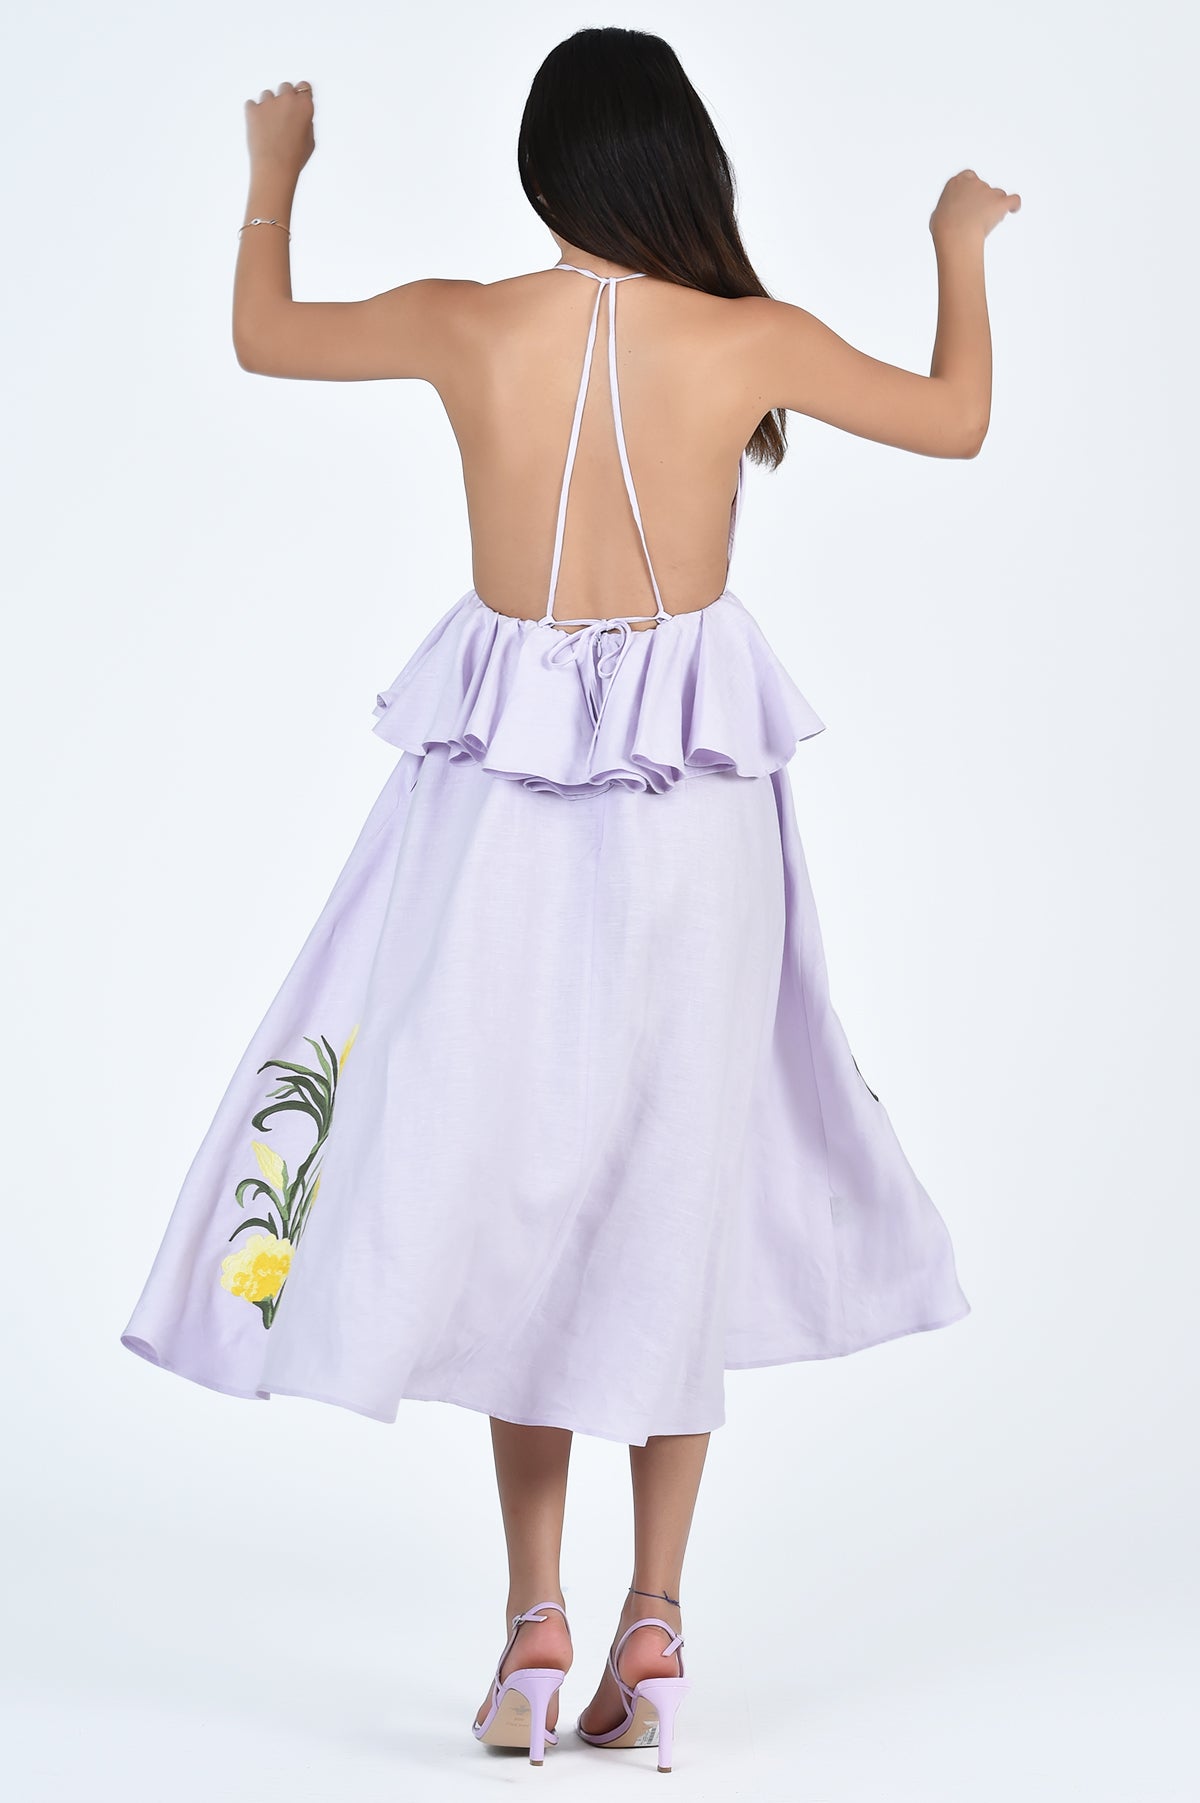 Fanm Mon Sherry Dress in Lilac Back Detail showcases Tie Back Closures 